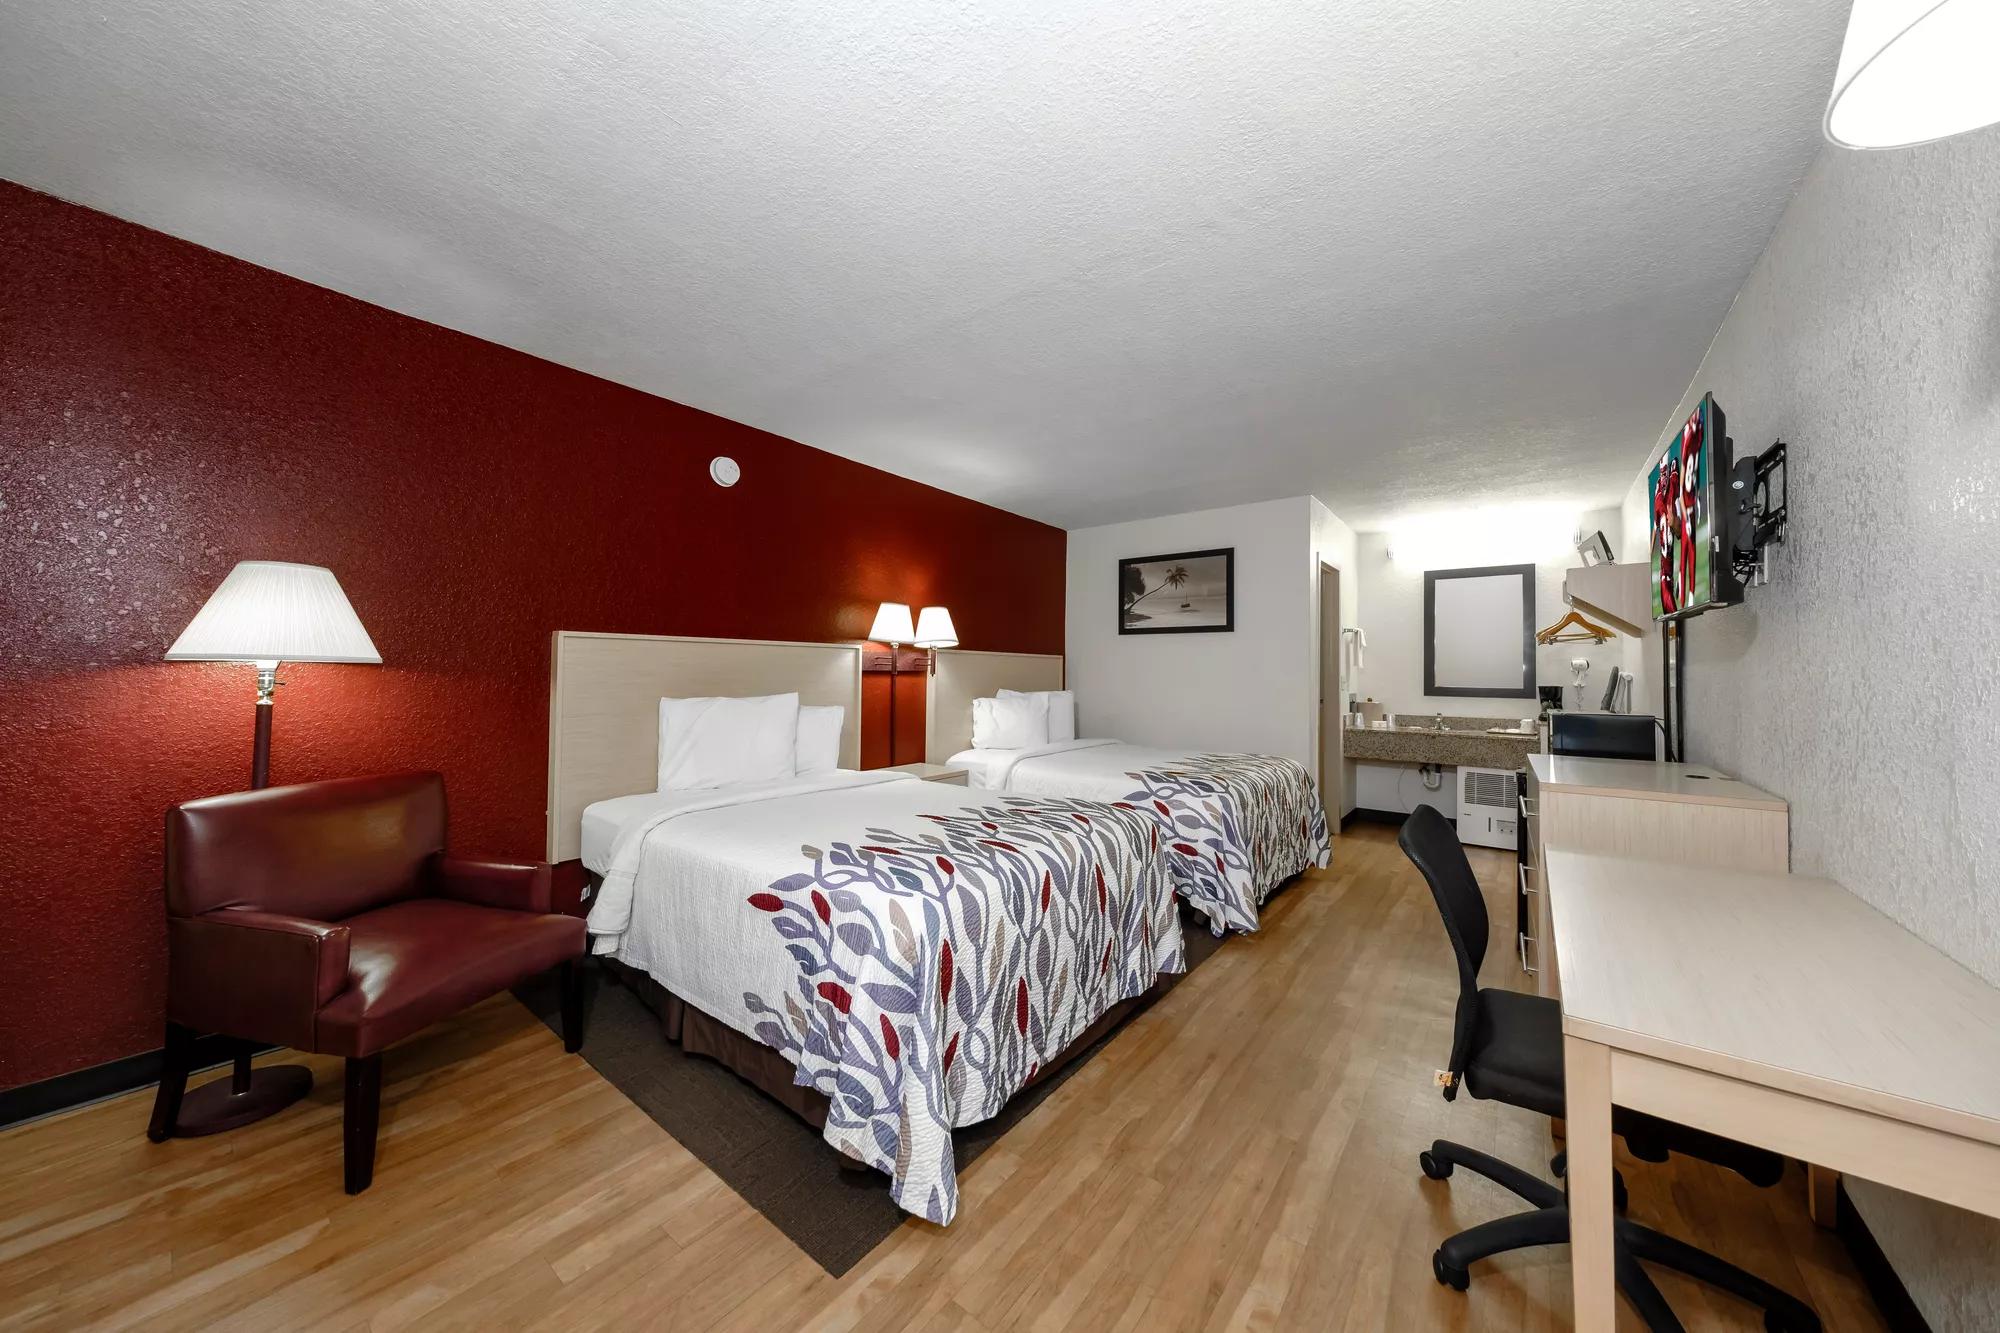 Red Roof Inn Ft Myers Double Bed Room Image